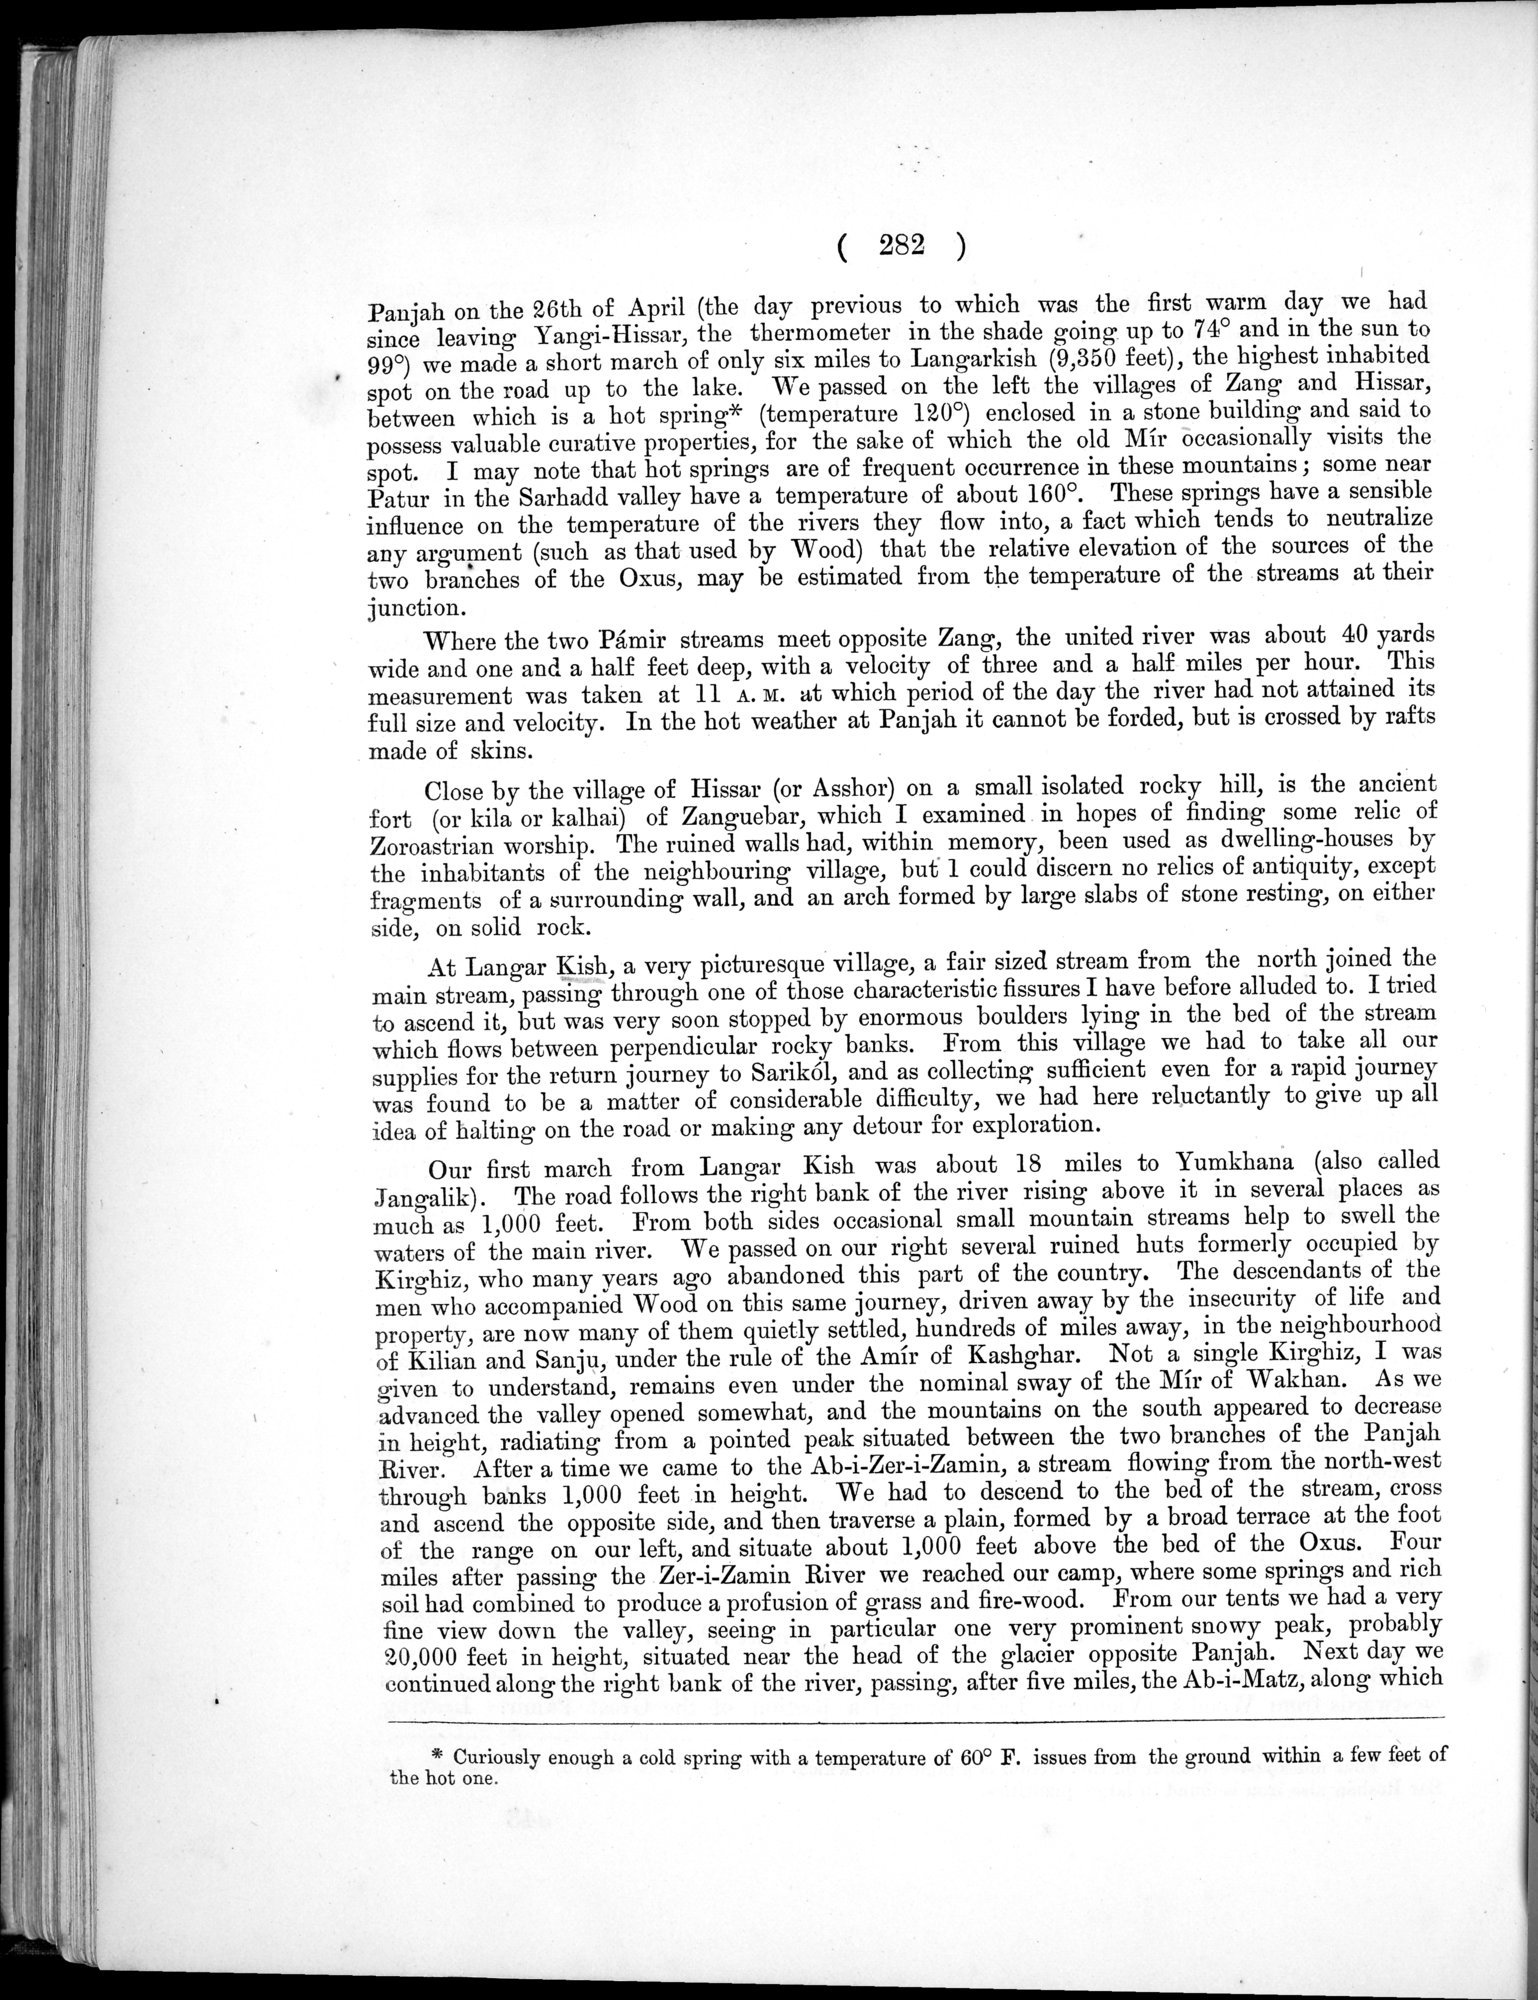 Report of a Mission to Yarkund in 1873 : vol.1 / Page 404 (Grayscale High Resolution Image)